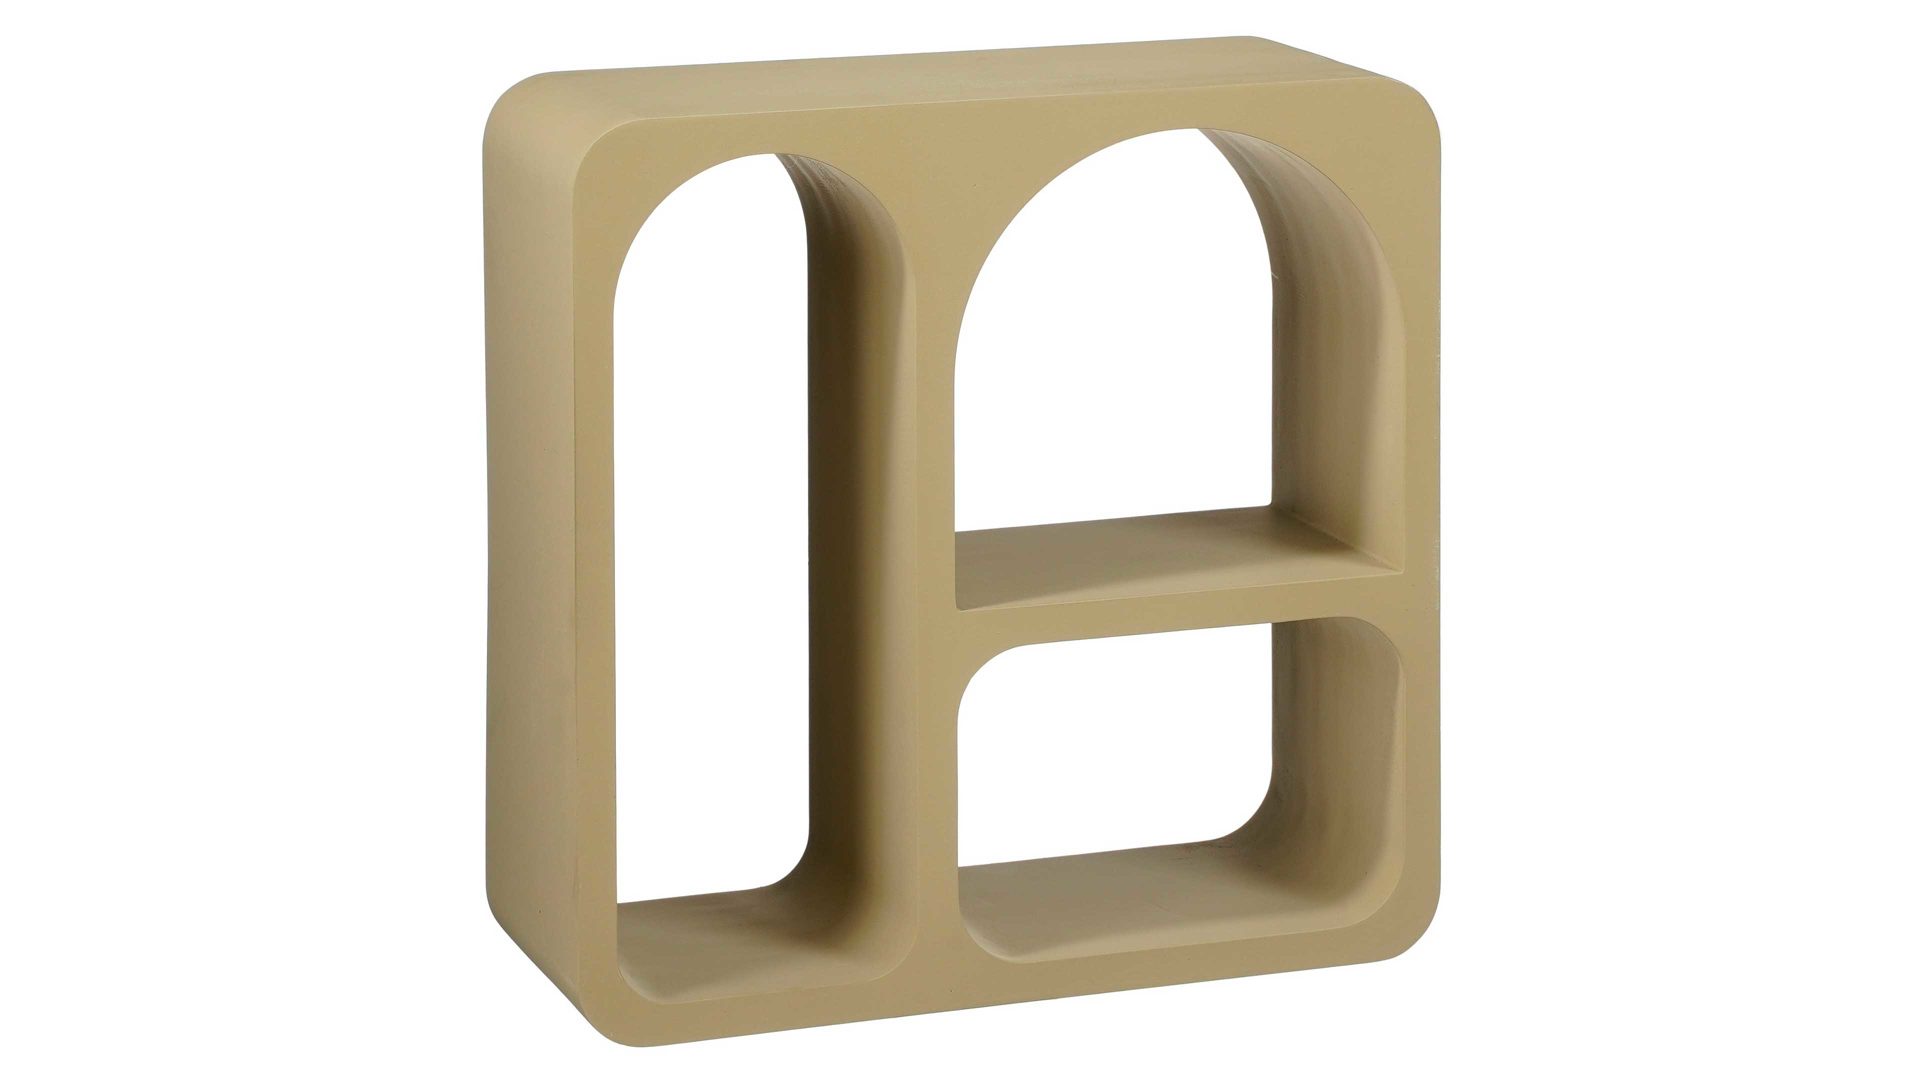 Wandregal Interliving BEST BUDDYS! aus Holz in Beige Interliving BEST BUDDYS! Wandregal Frati taupefarbenes MDF - ca. 40 x 40 cm